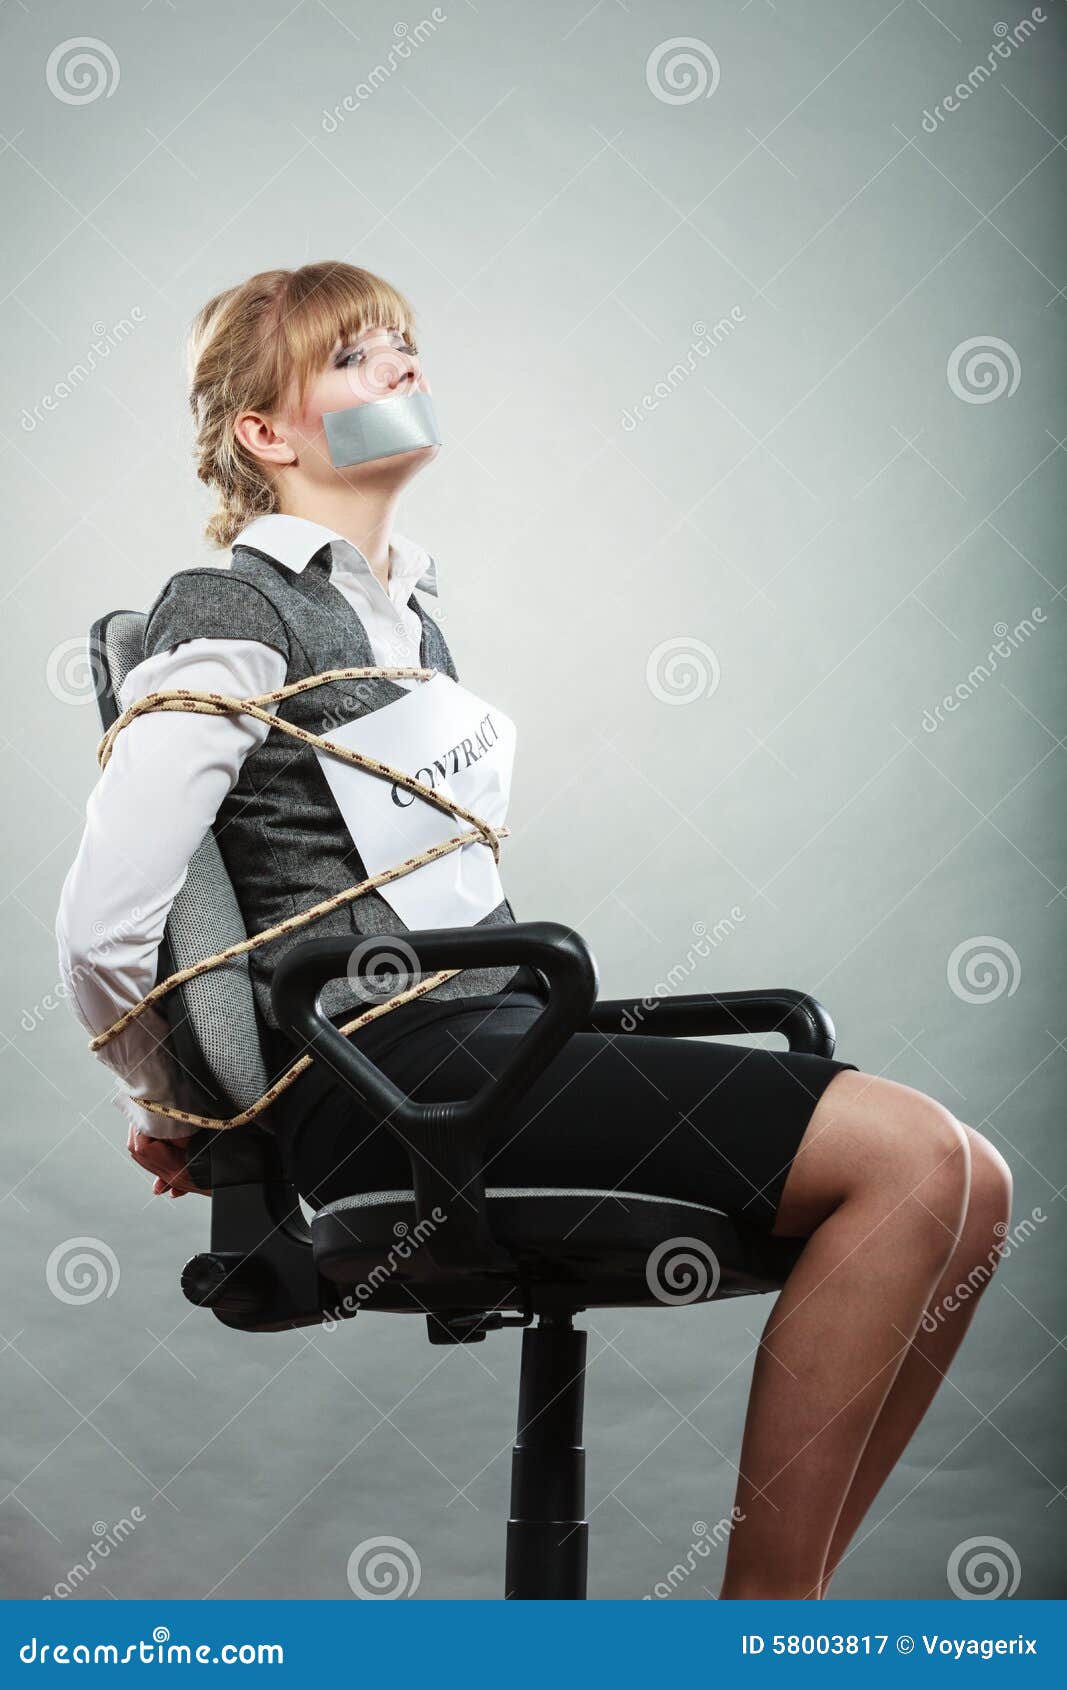 christina turgeon recommends women tied to chair pic